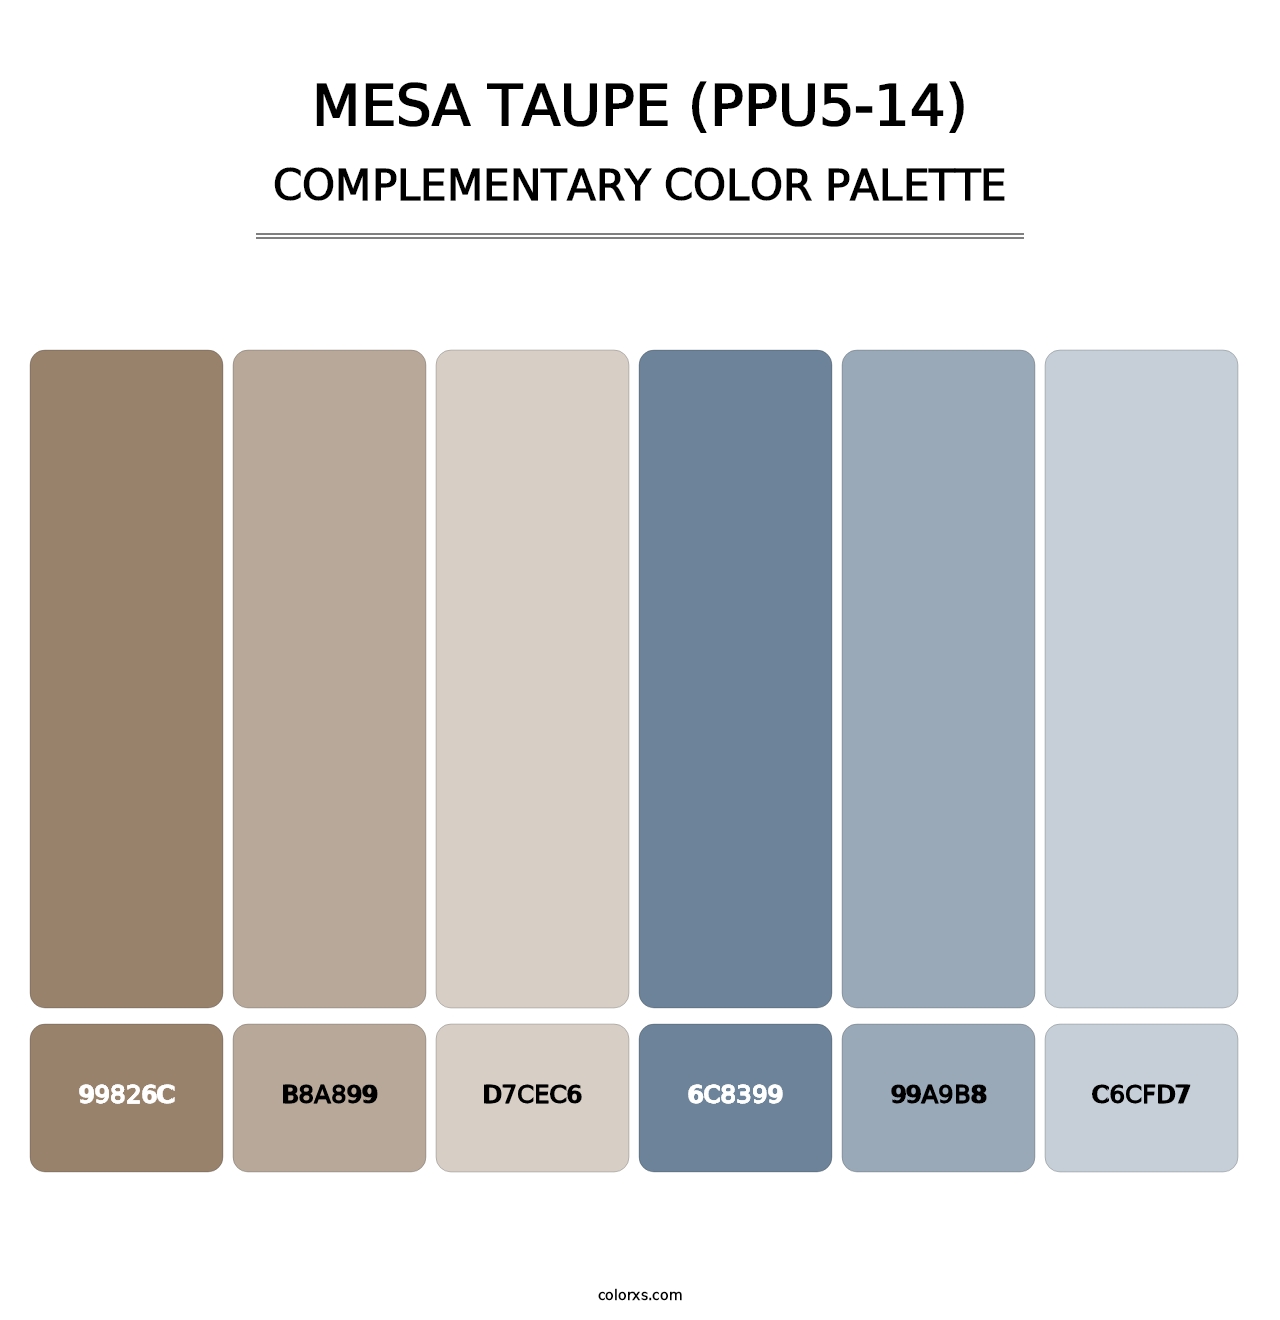 Mesa Taupe (PPU5-14) - Complementary Color Palette